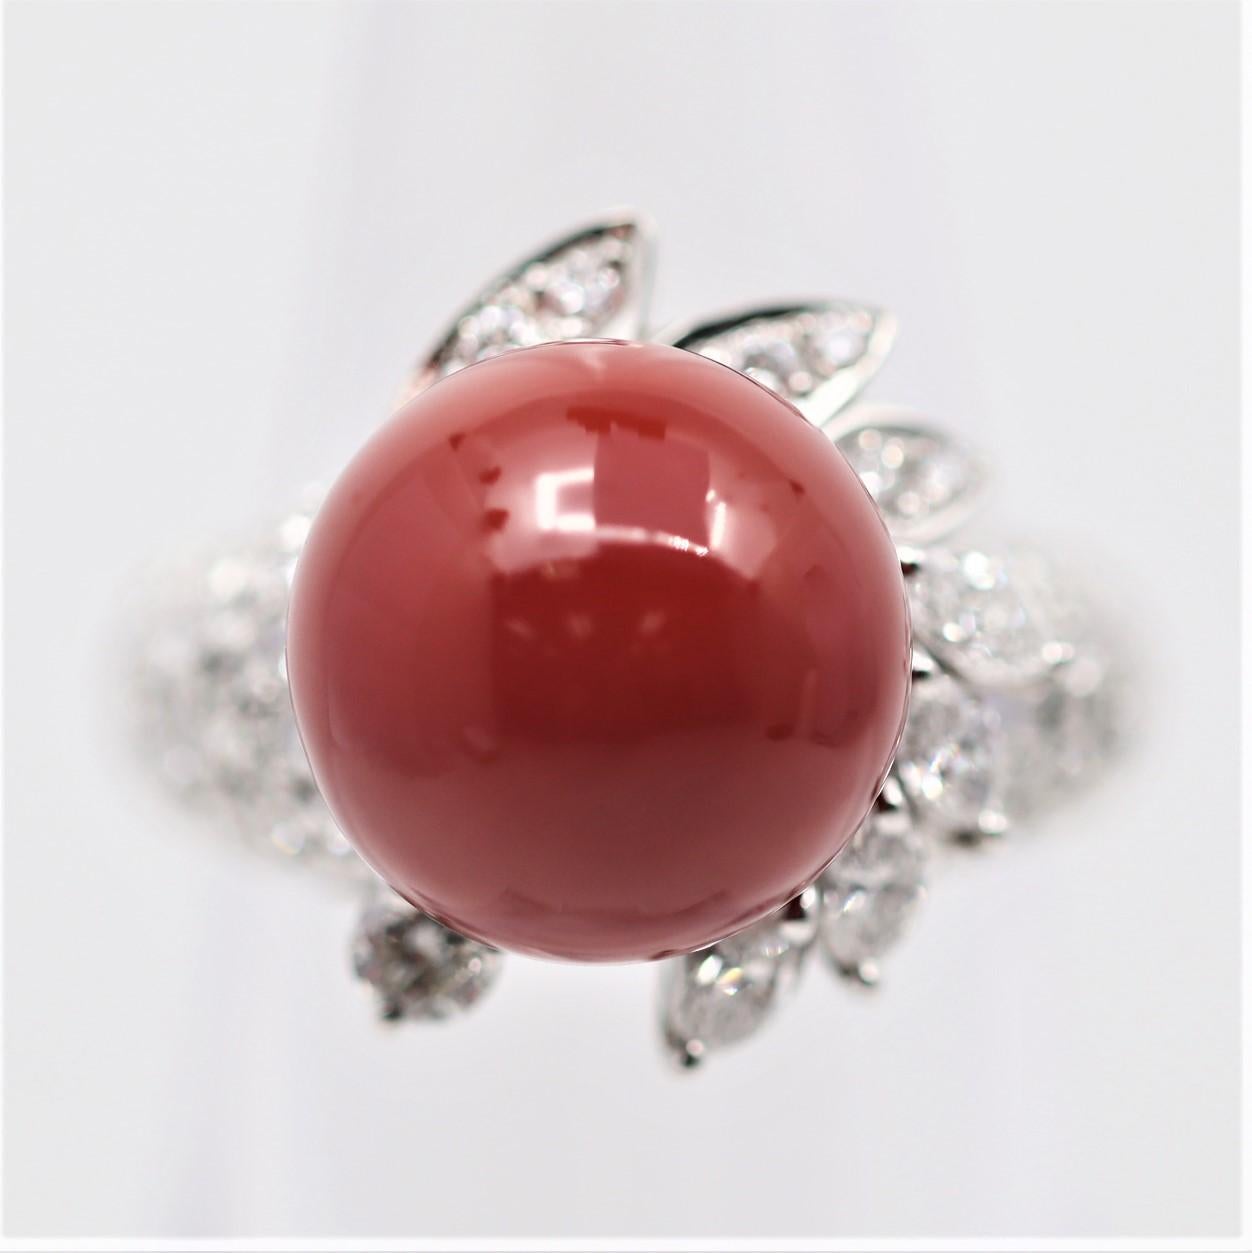 A sleek and stylish ring featuring a 12mm coral with the ideal bright red color, known as “oxblood” in the trade. It is complemented by 0.80 carats of round brilliant and marquise-shape diamonds adding sparkle and brilliance to the ring.